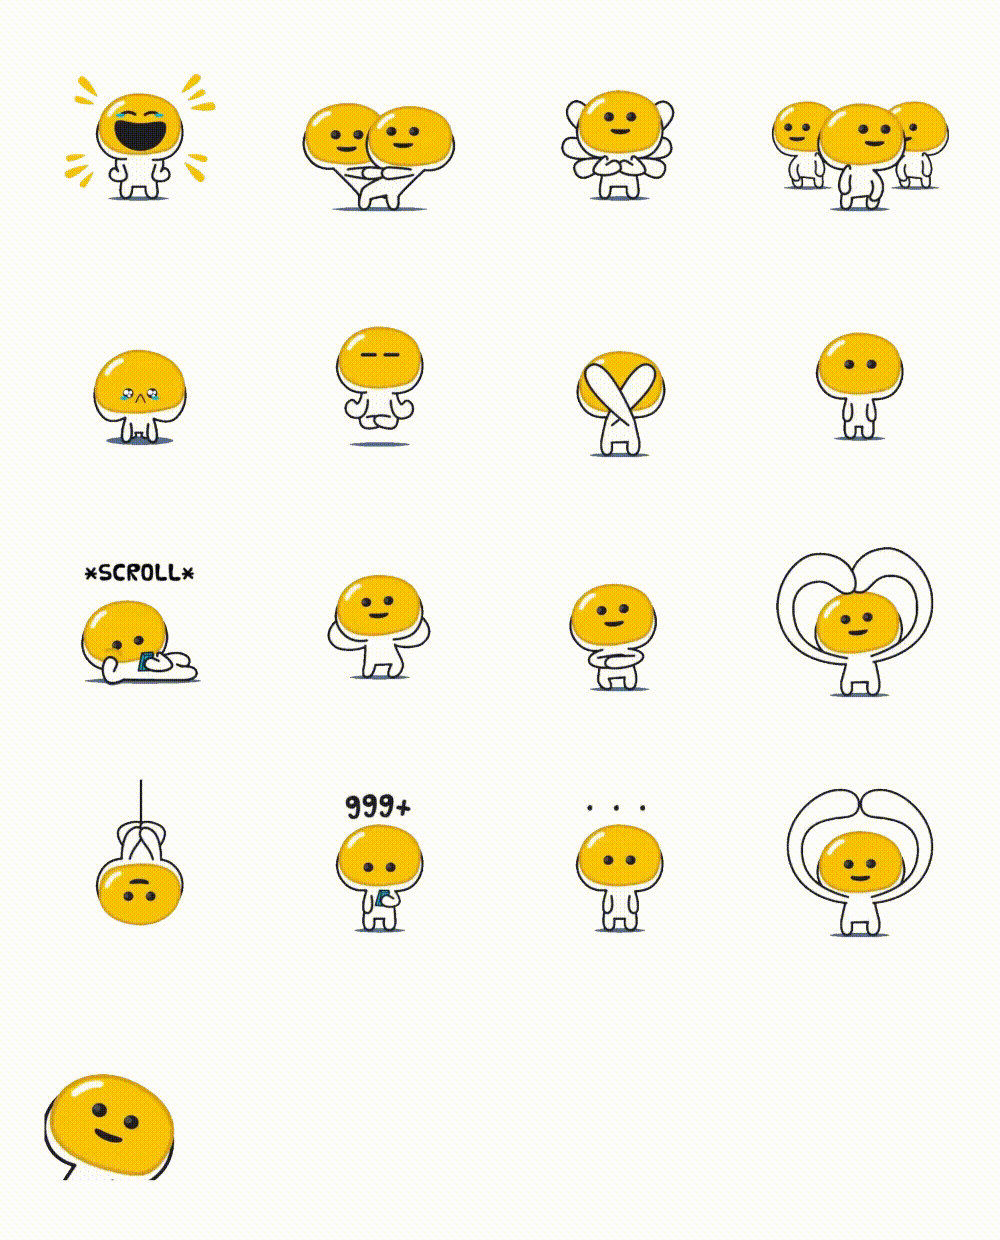 Daily Sunny Side Up 2 Animation/Cartoon,Food/Drink sticker pack for Whatsapp, Telegram, Signal, and others chatting and message apps